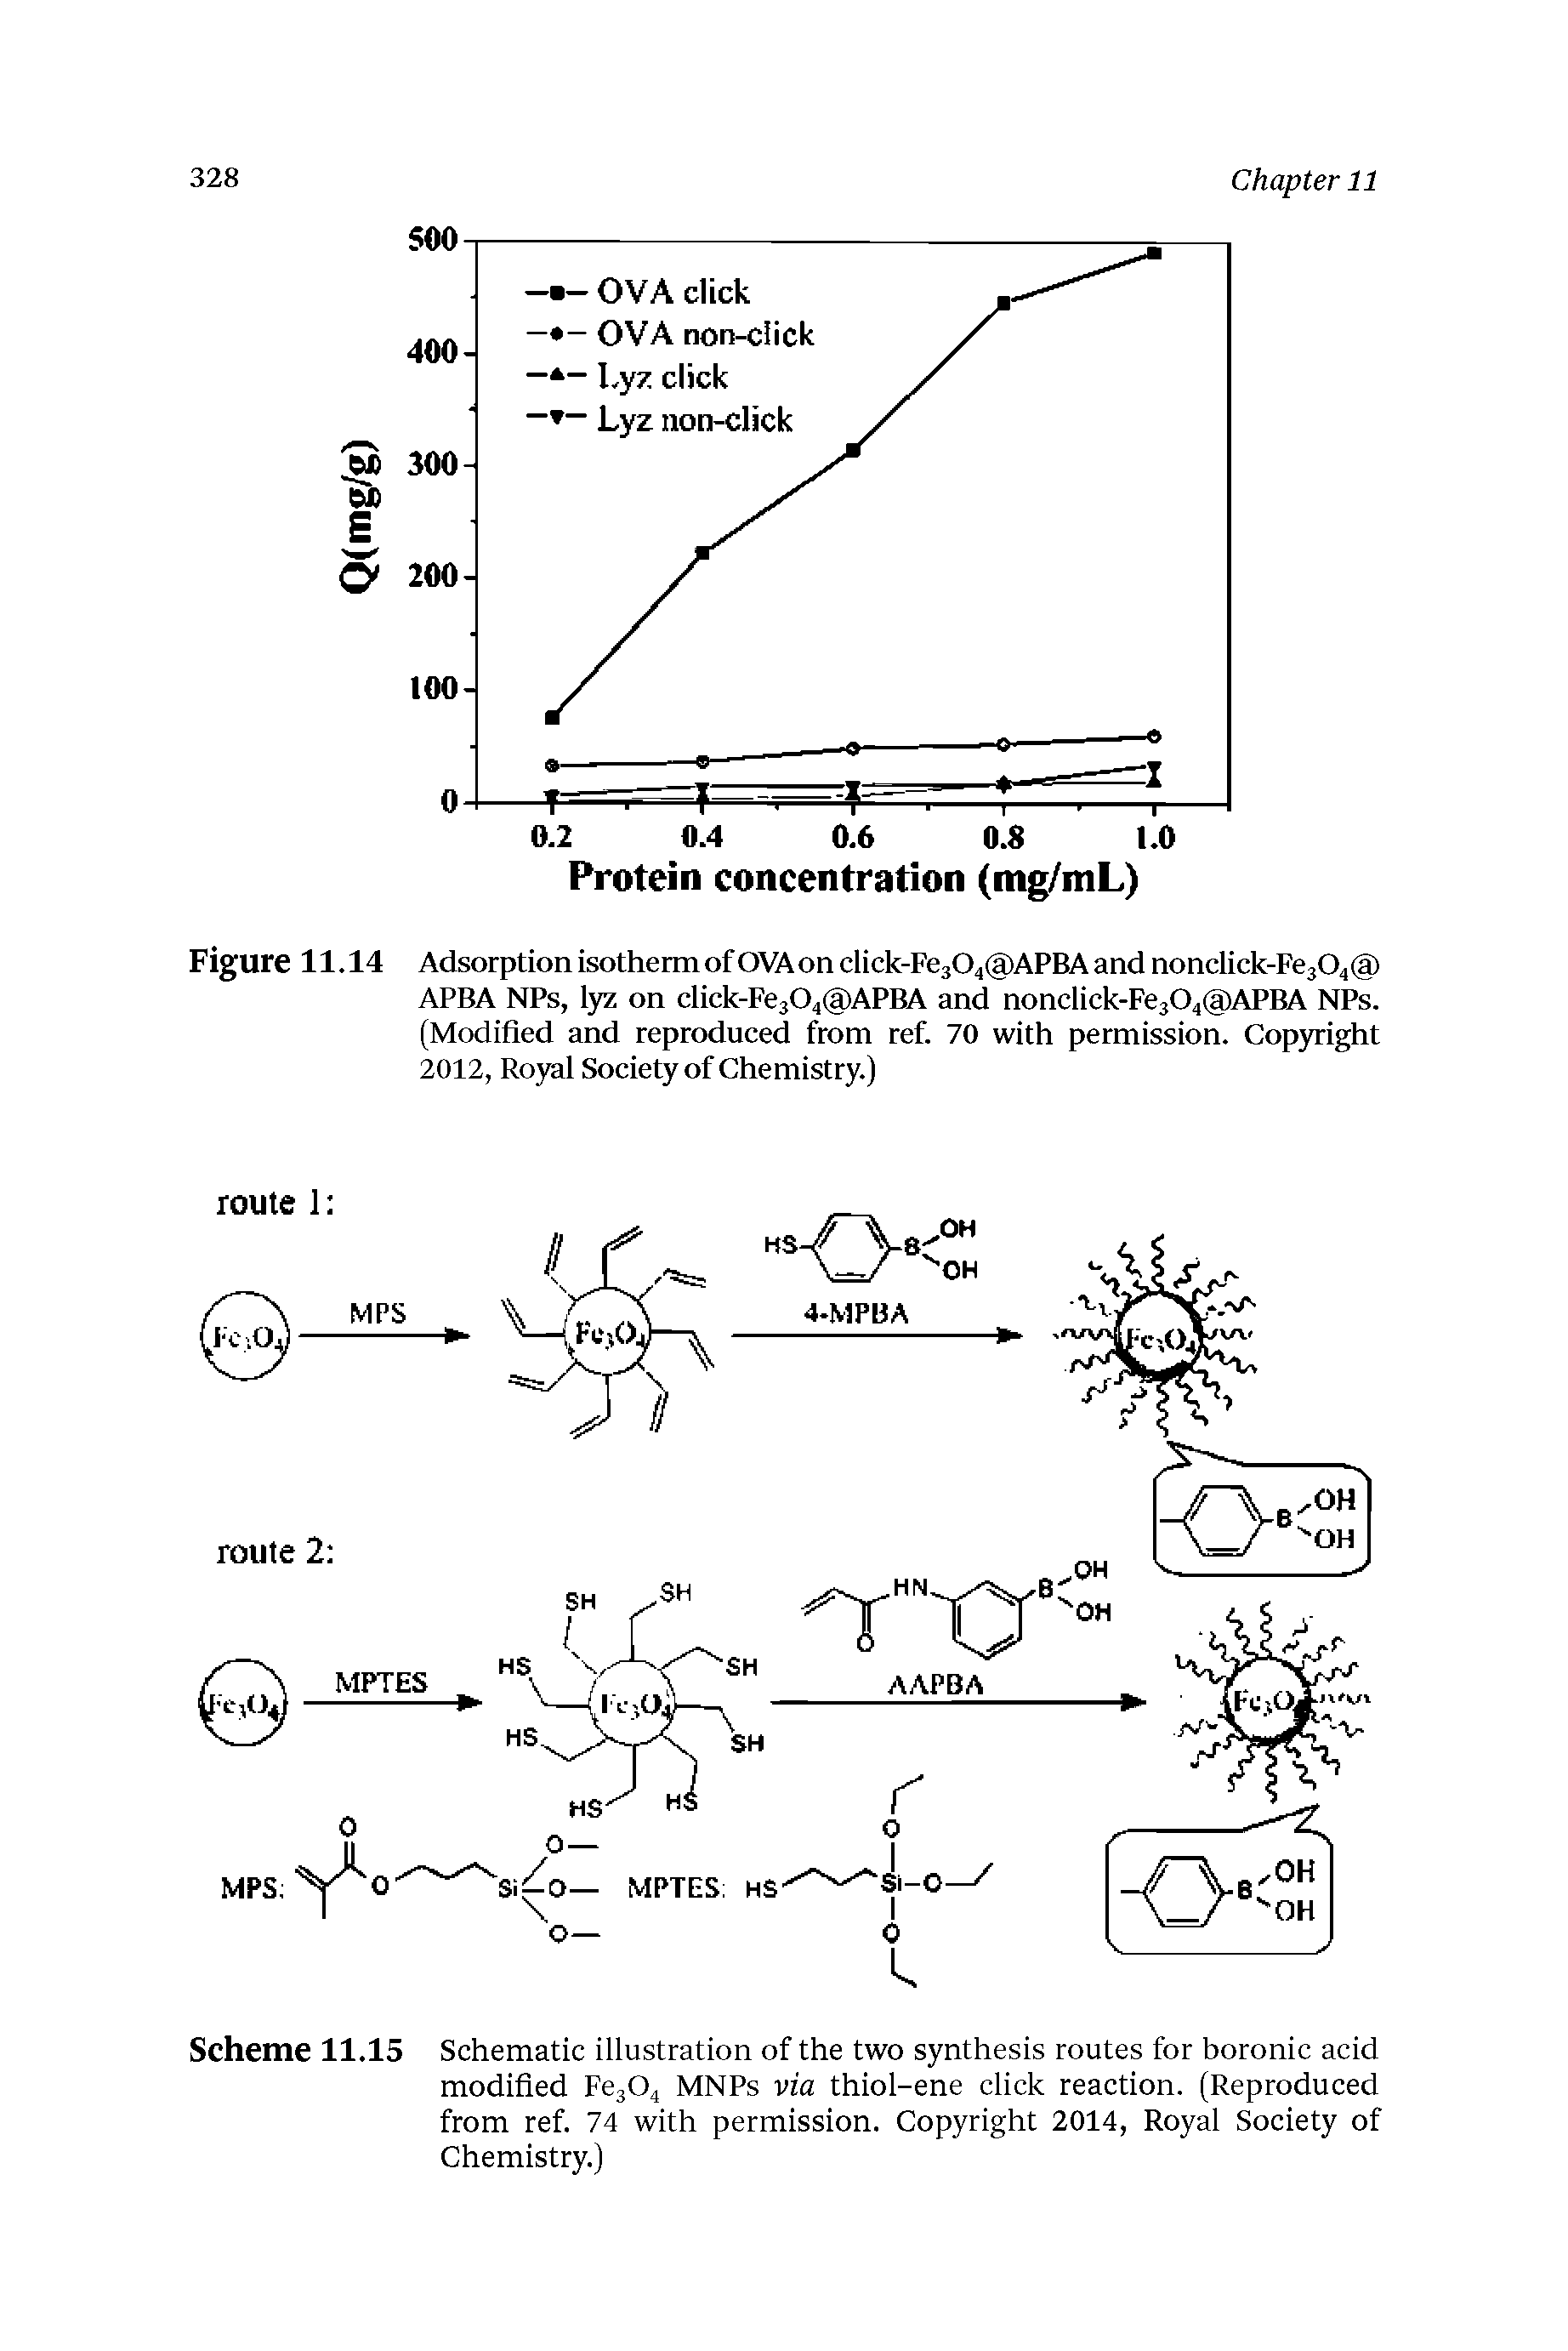 Scheme 11.15 Schematic illustration of the two synthesis routes for boronic acid modified Fe304 MNPs via thiol-ene click reaction. (Reproduced from ref. 74 with permission. Copyright 2014, Royal Society of Chemistry.)...